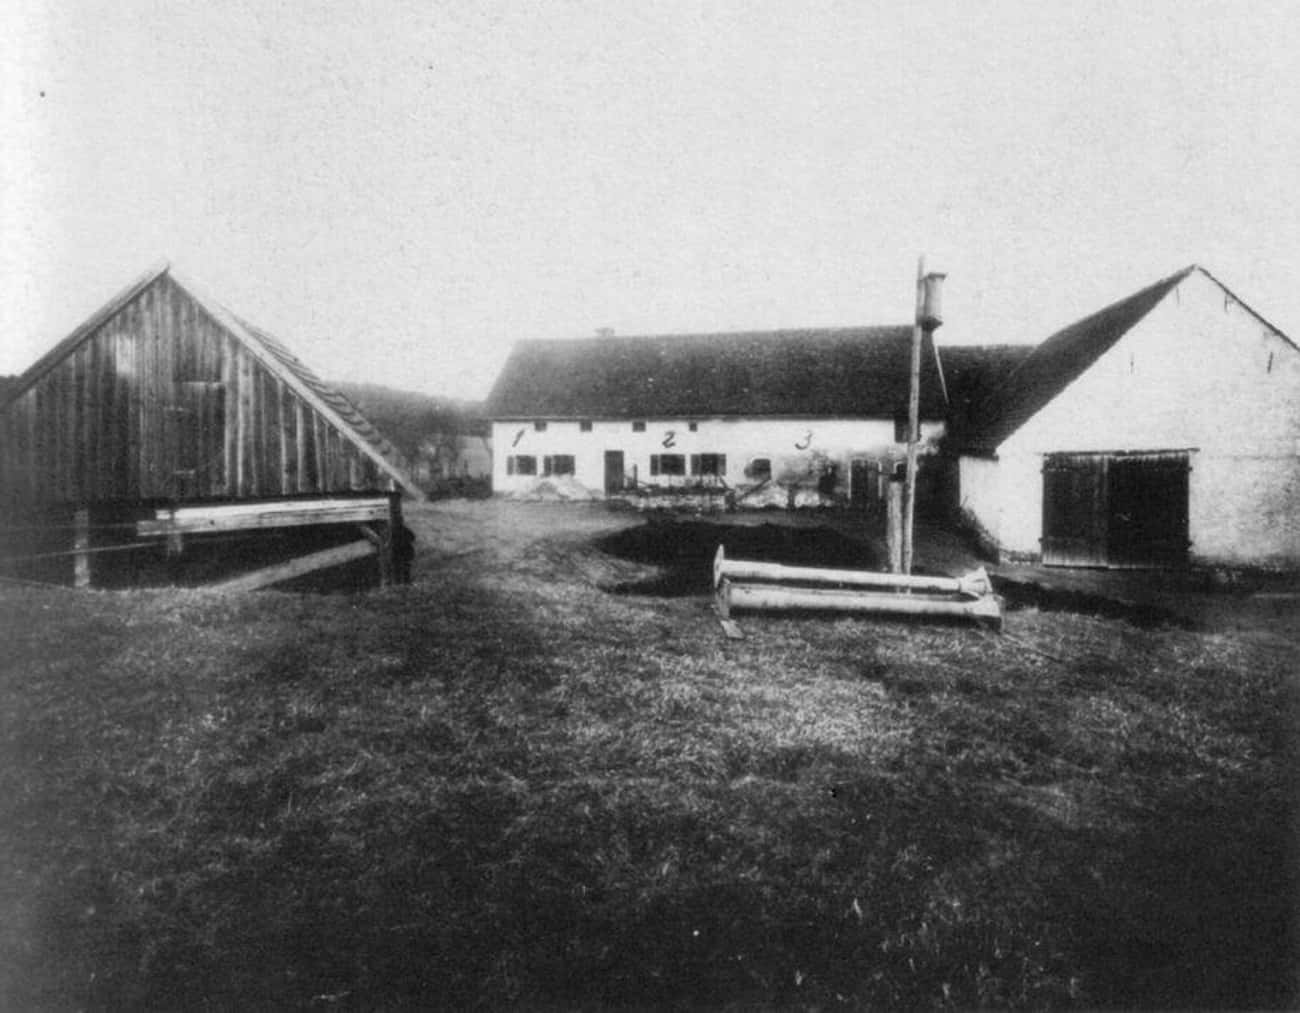 In April 1922, A Family And Their Maid Were Found Murdered At Their Farm In Hinterkaifeck, Germany